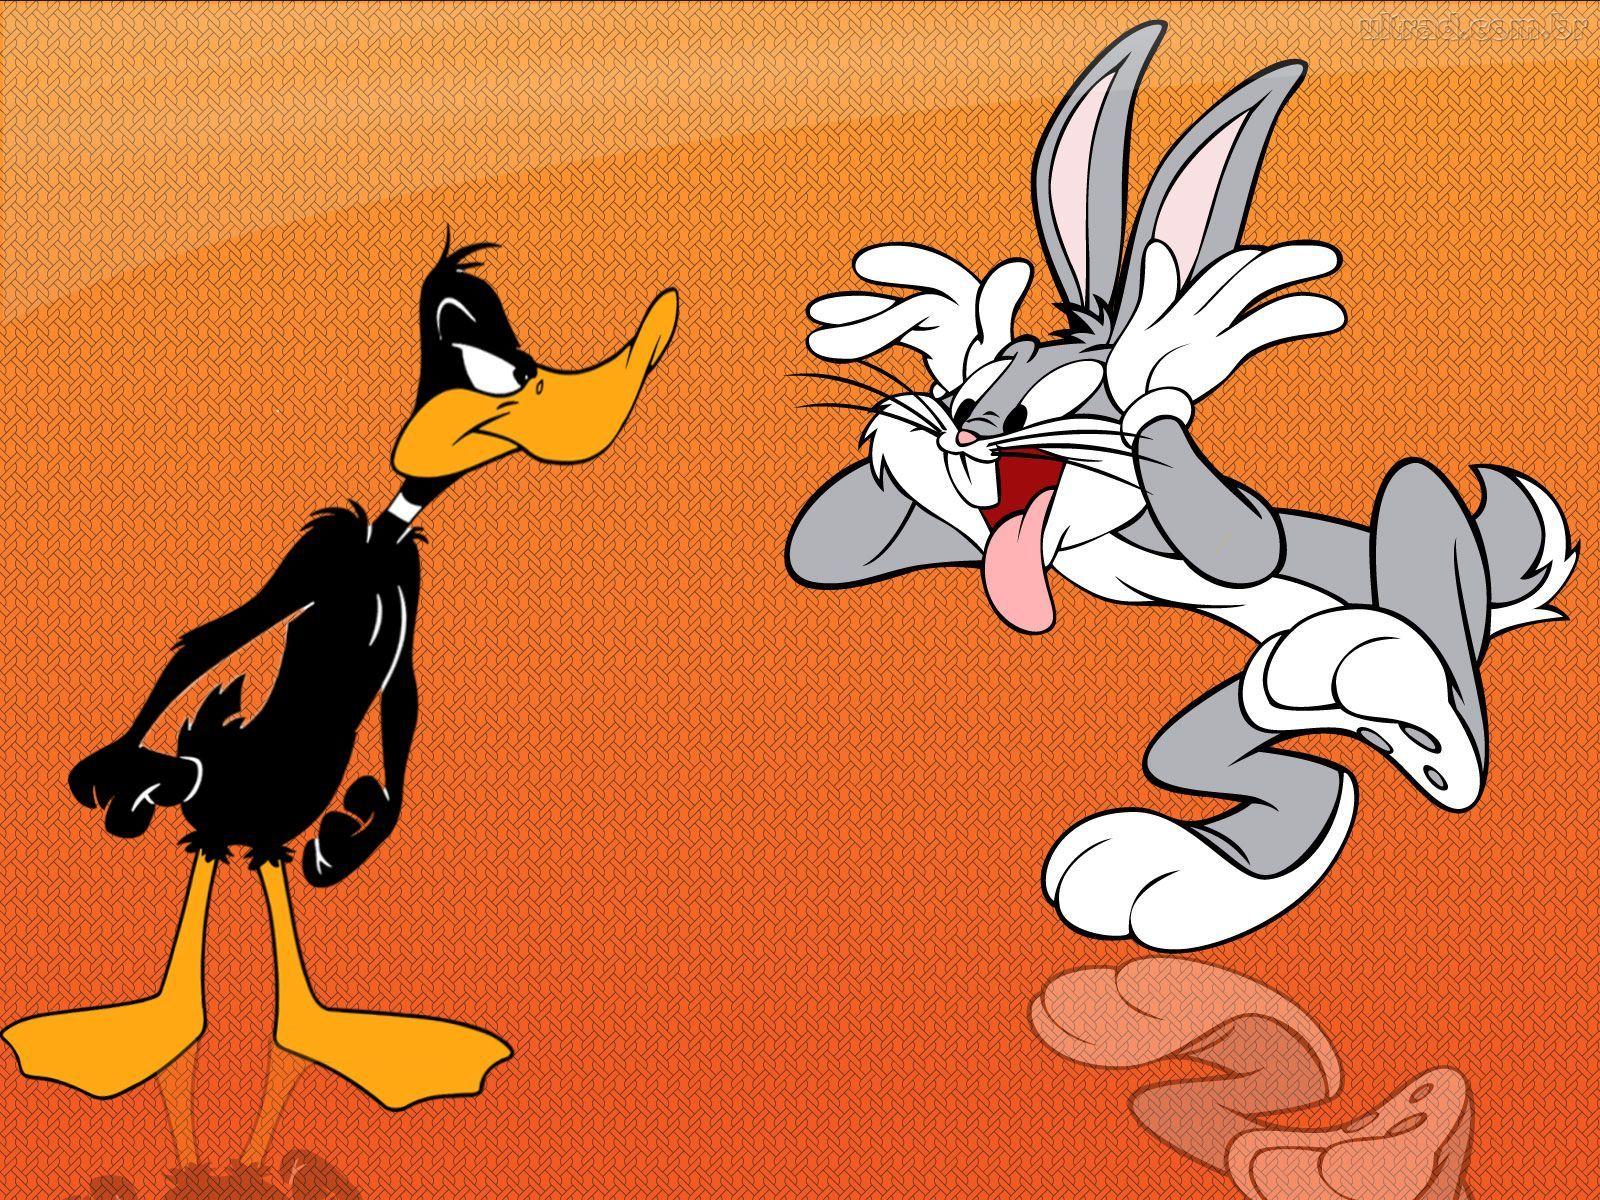 Bugs Bunny Drawing Daffy Duck Episode Daffy Looney Toons Bugs Bunny